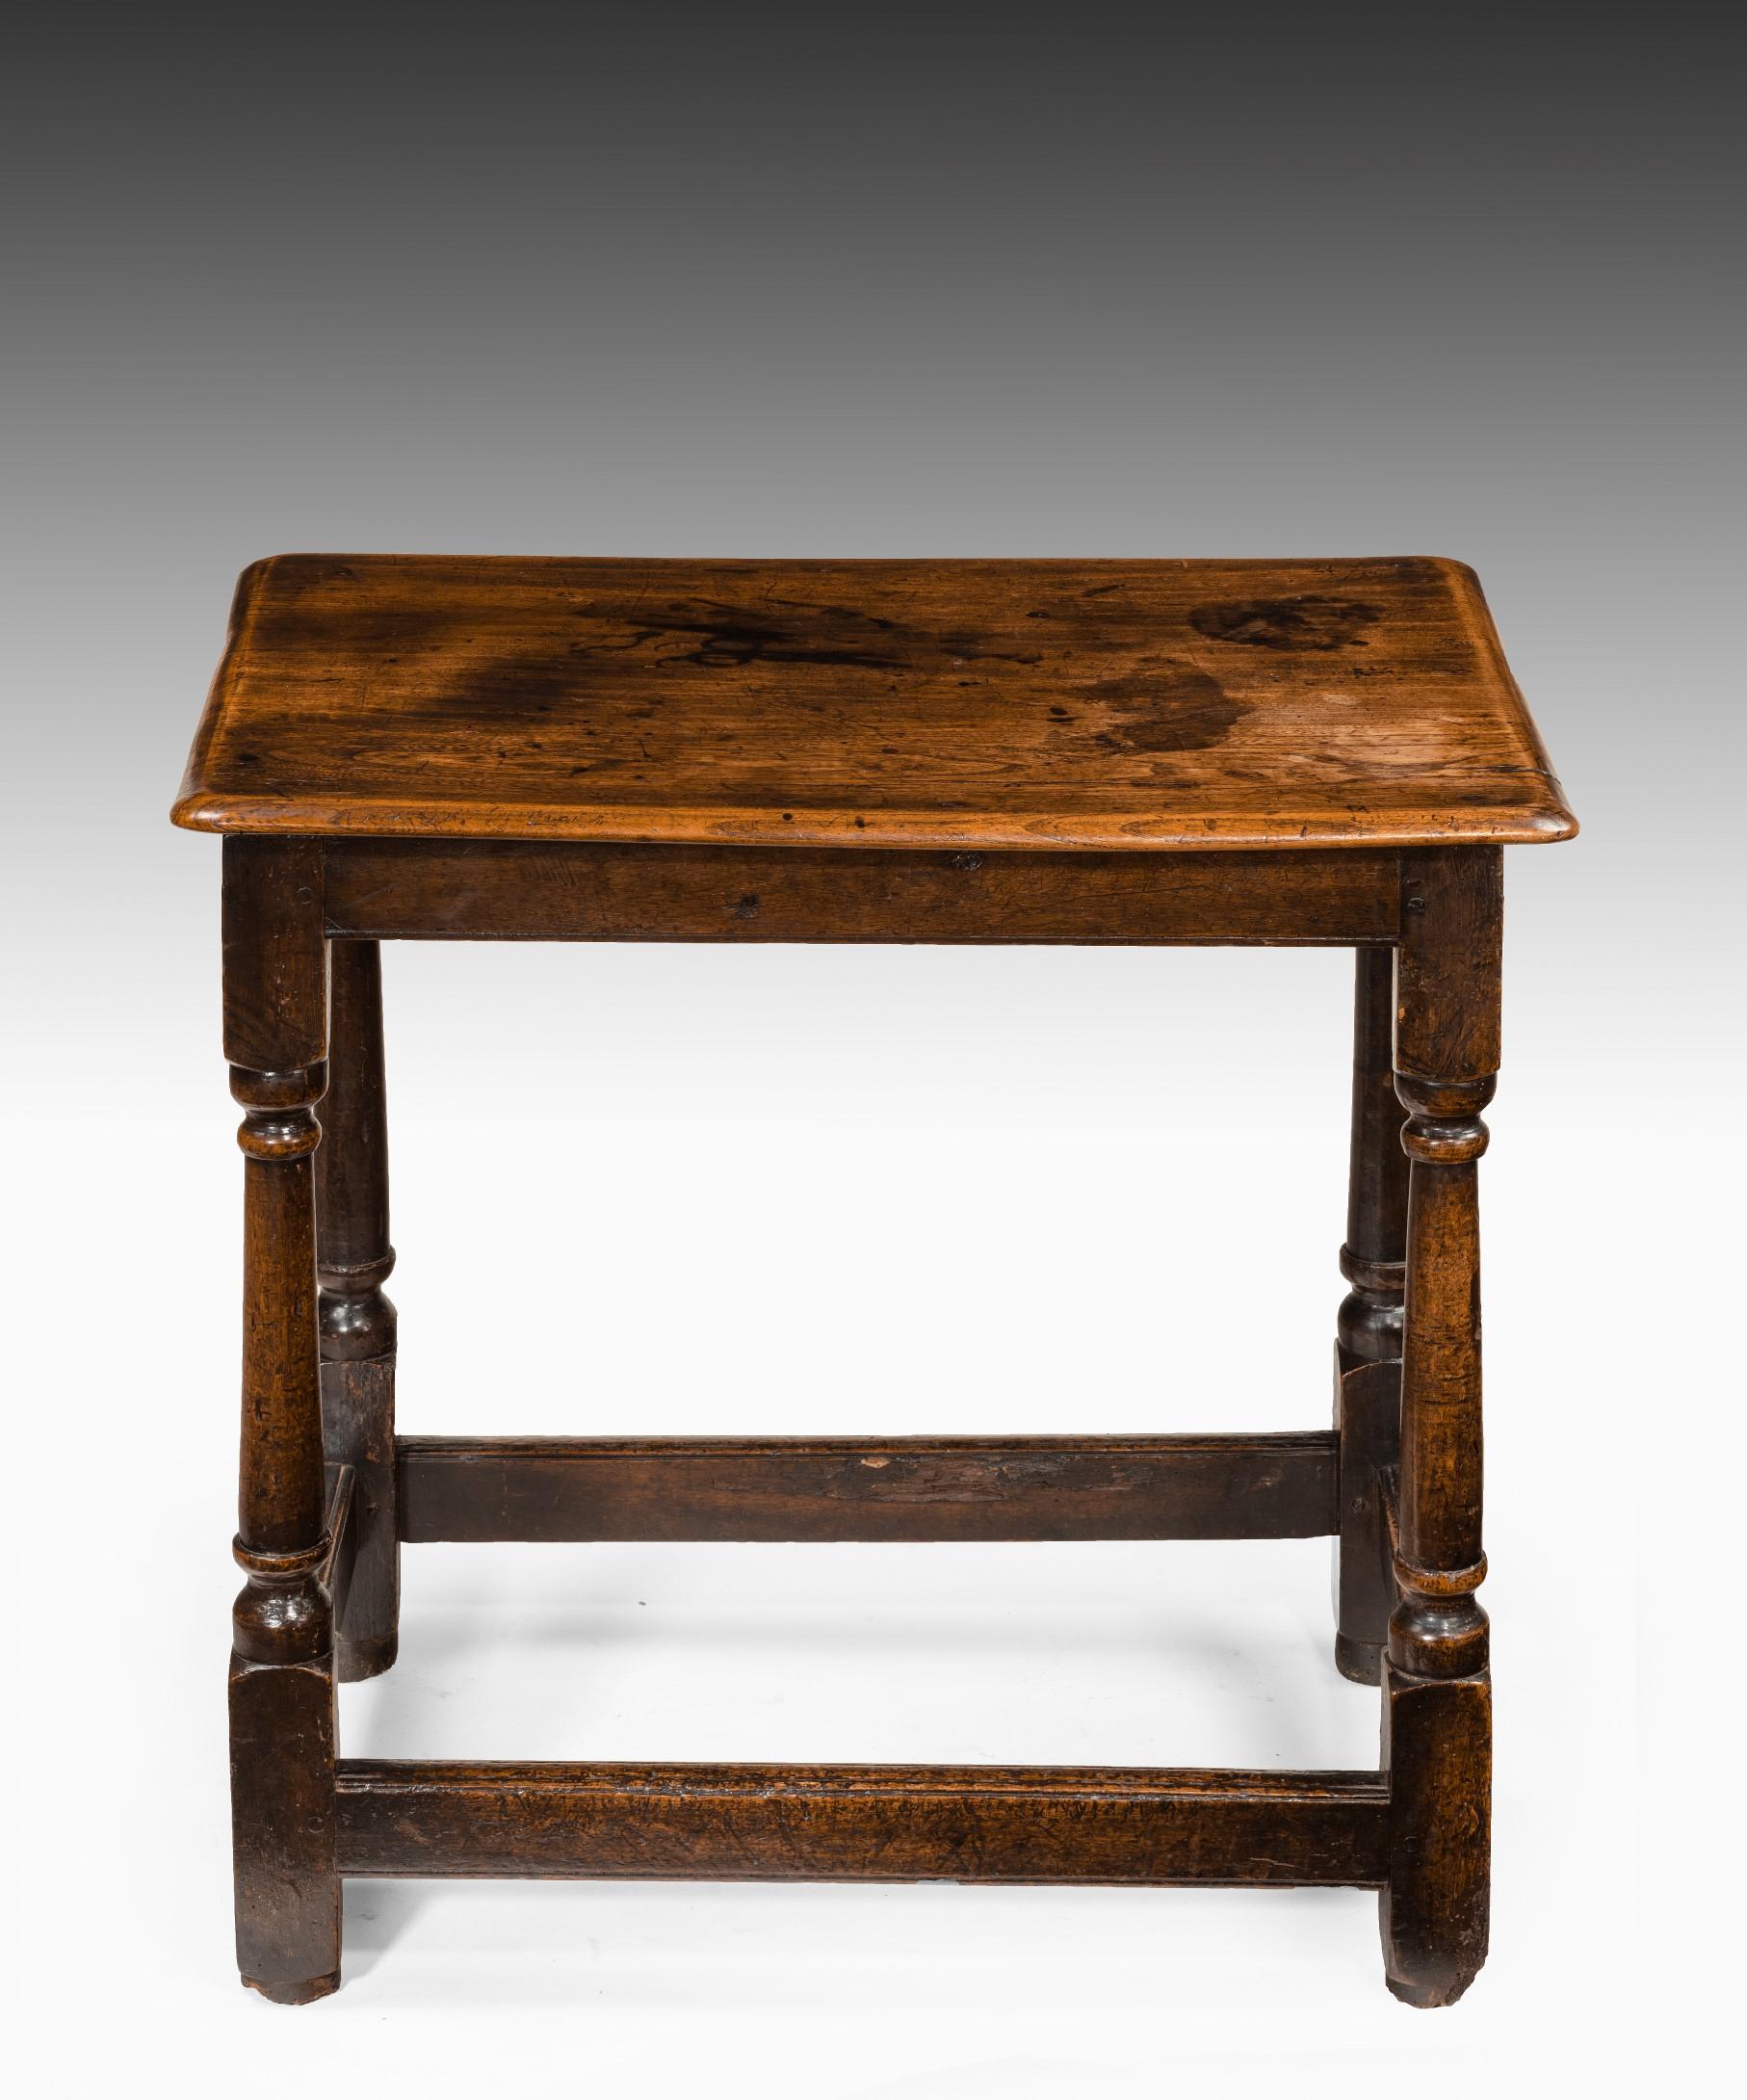 A charming Queen Anne elm side table; the well figured top raised on turned legs united by stretchers and standing on the original turned feet. This side table retains a superb color and patination.

I selected this side table for its fantastic